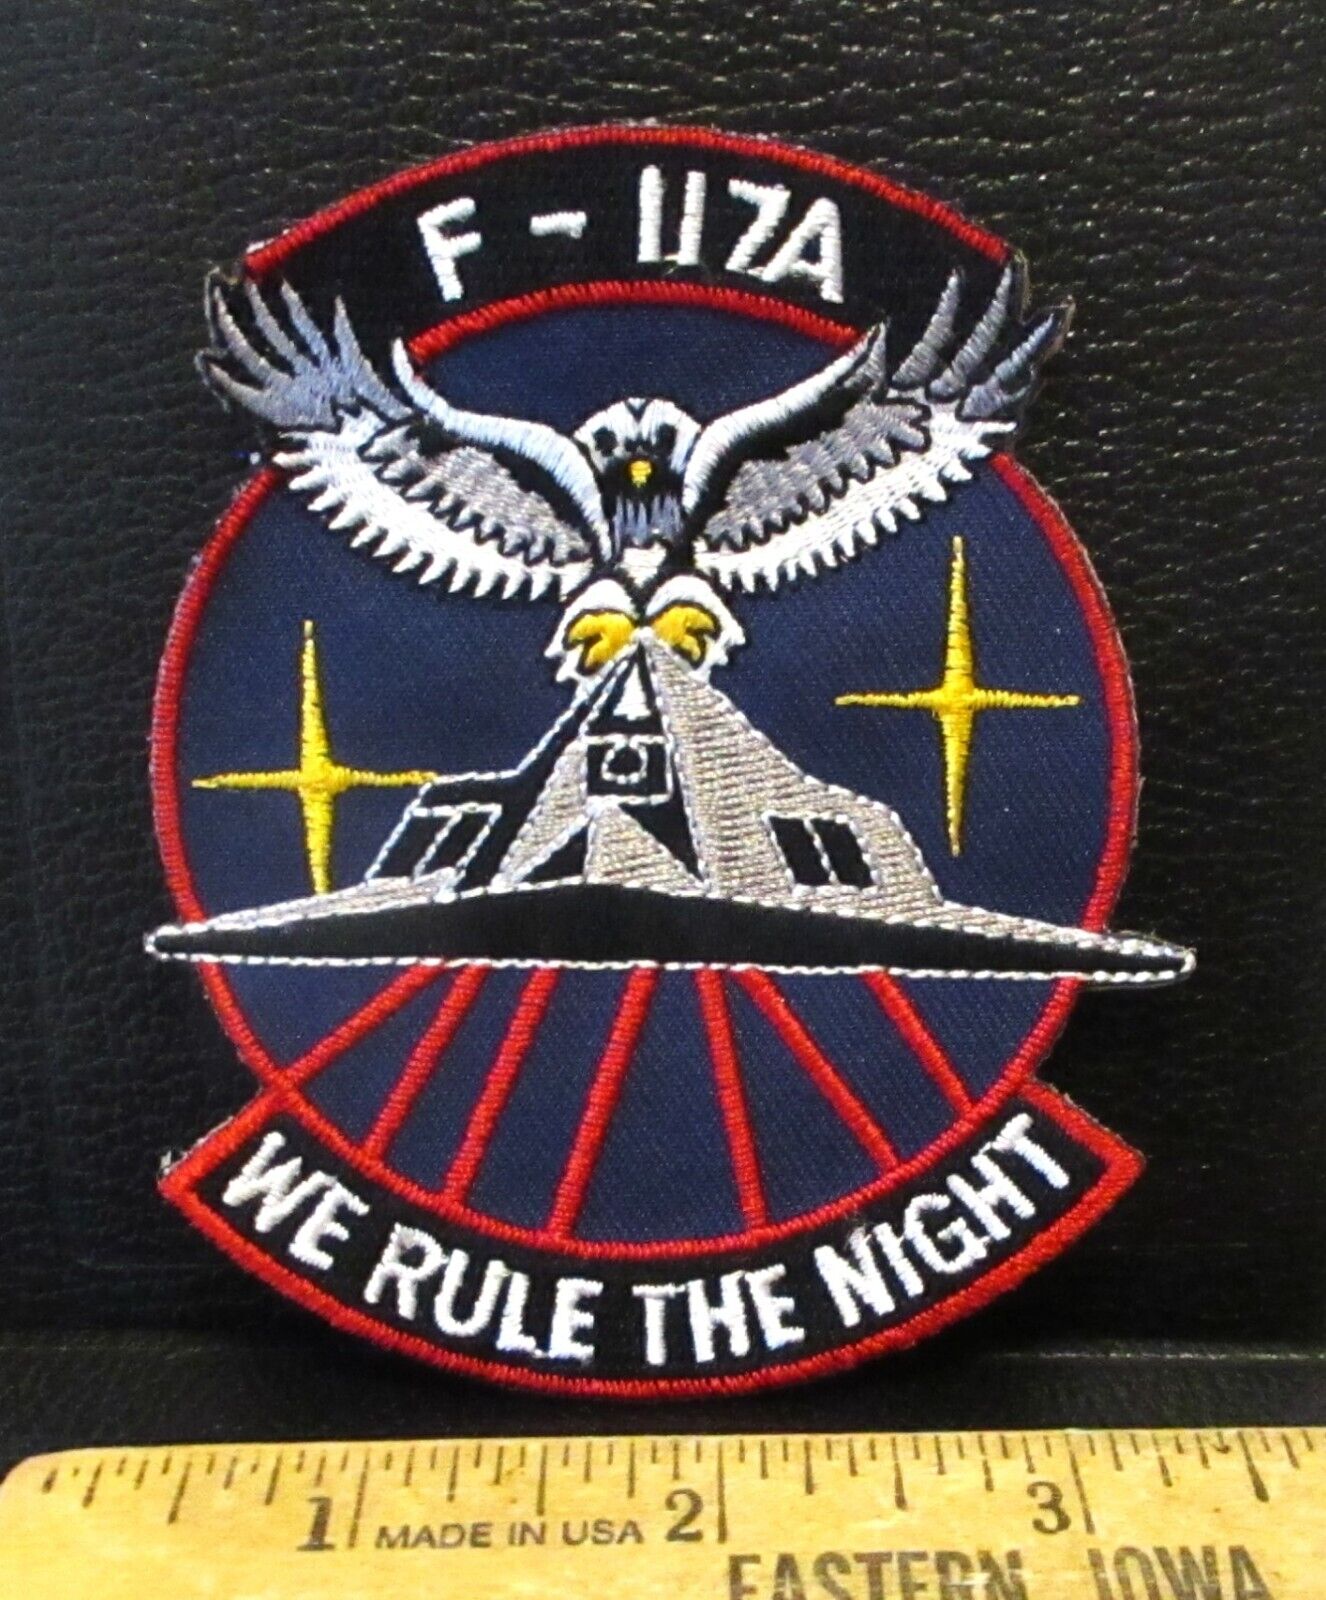 USAF US Air Force F117A Nighthawk Stealth Jet Fighter Plane Rule The Night Patch